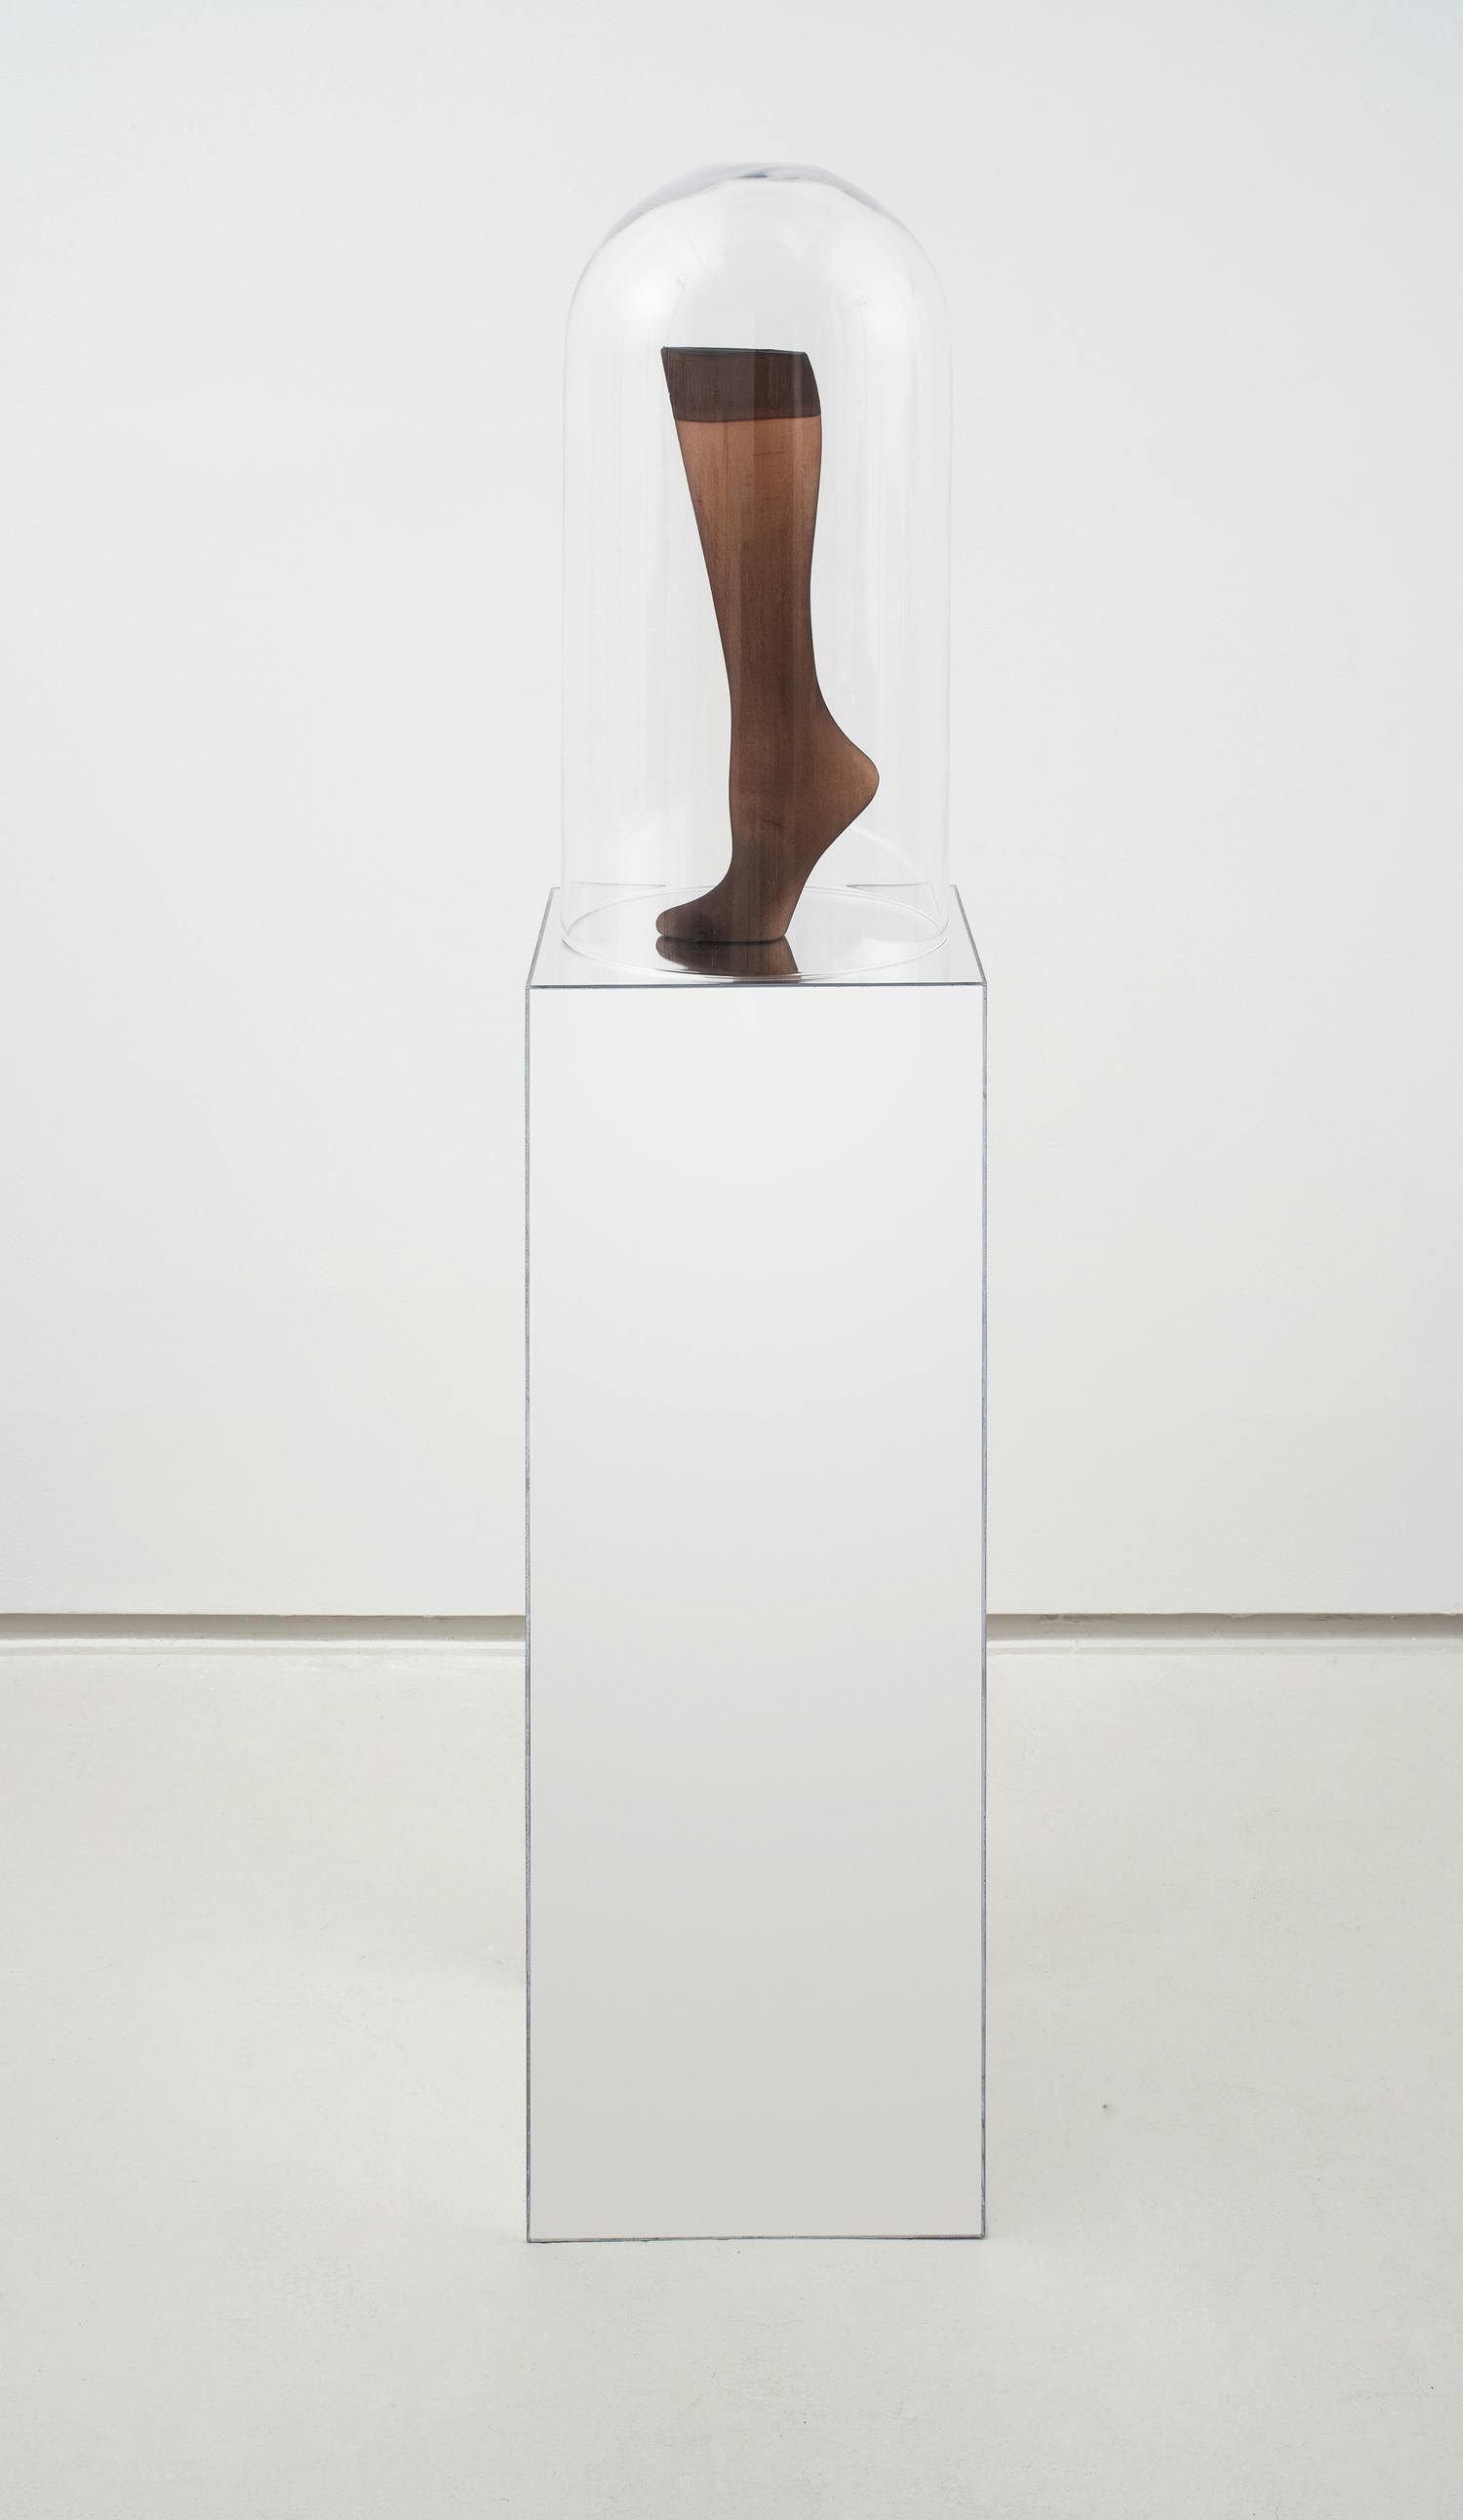 A sculpture made of a mannequin foot in brown stockings covered by a glass bell jar sitting on a mirrored plinth.